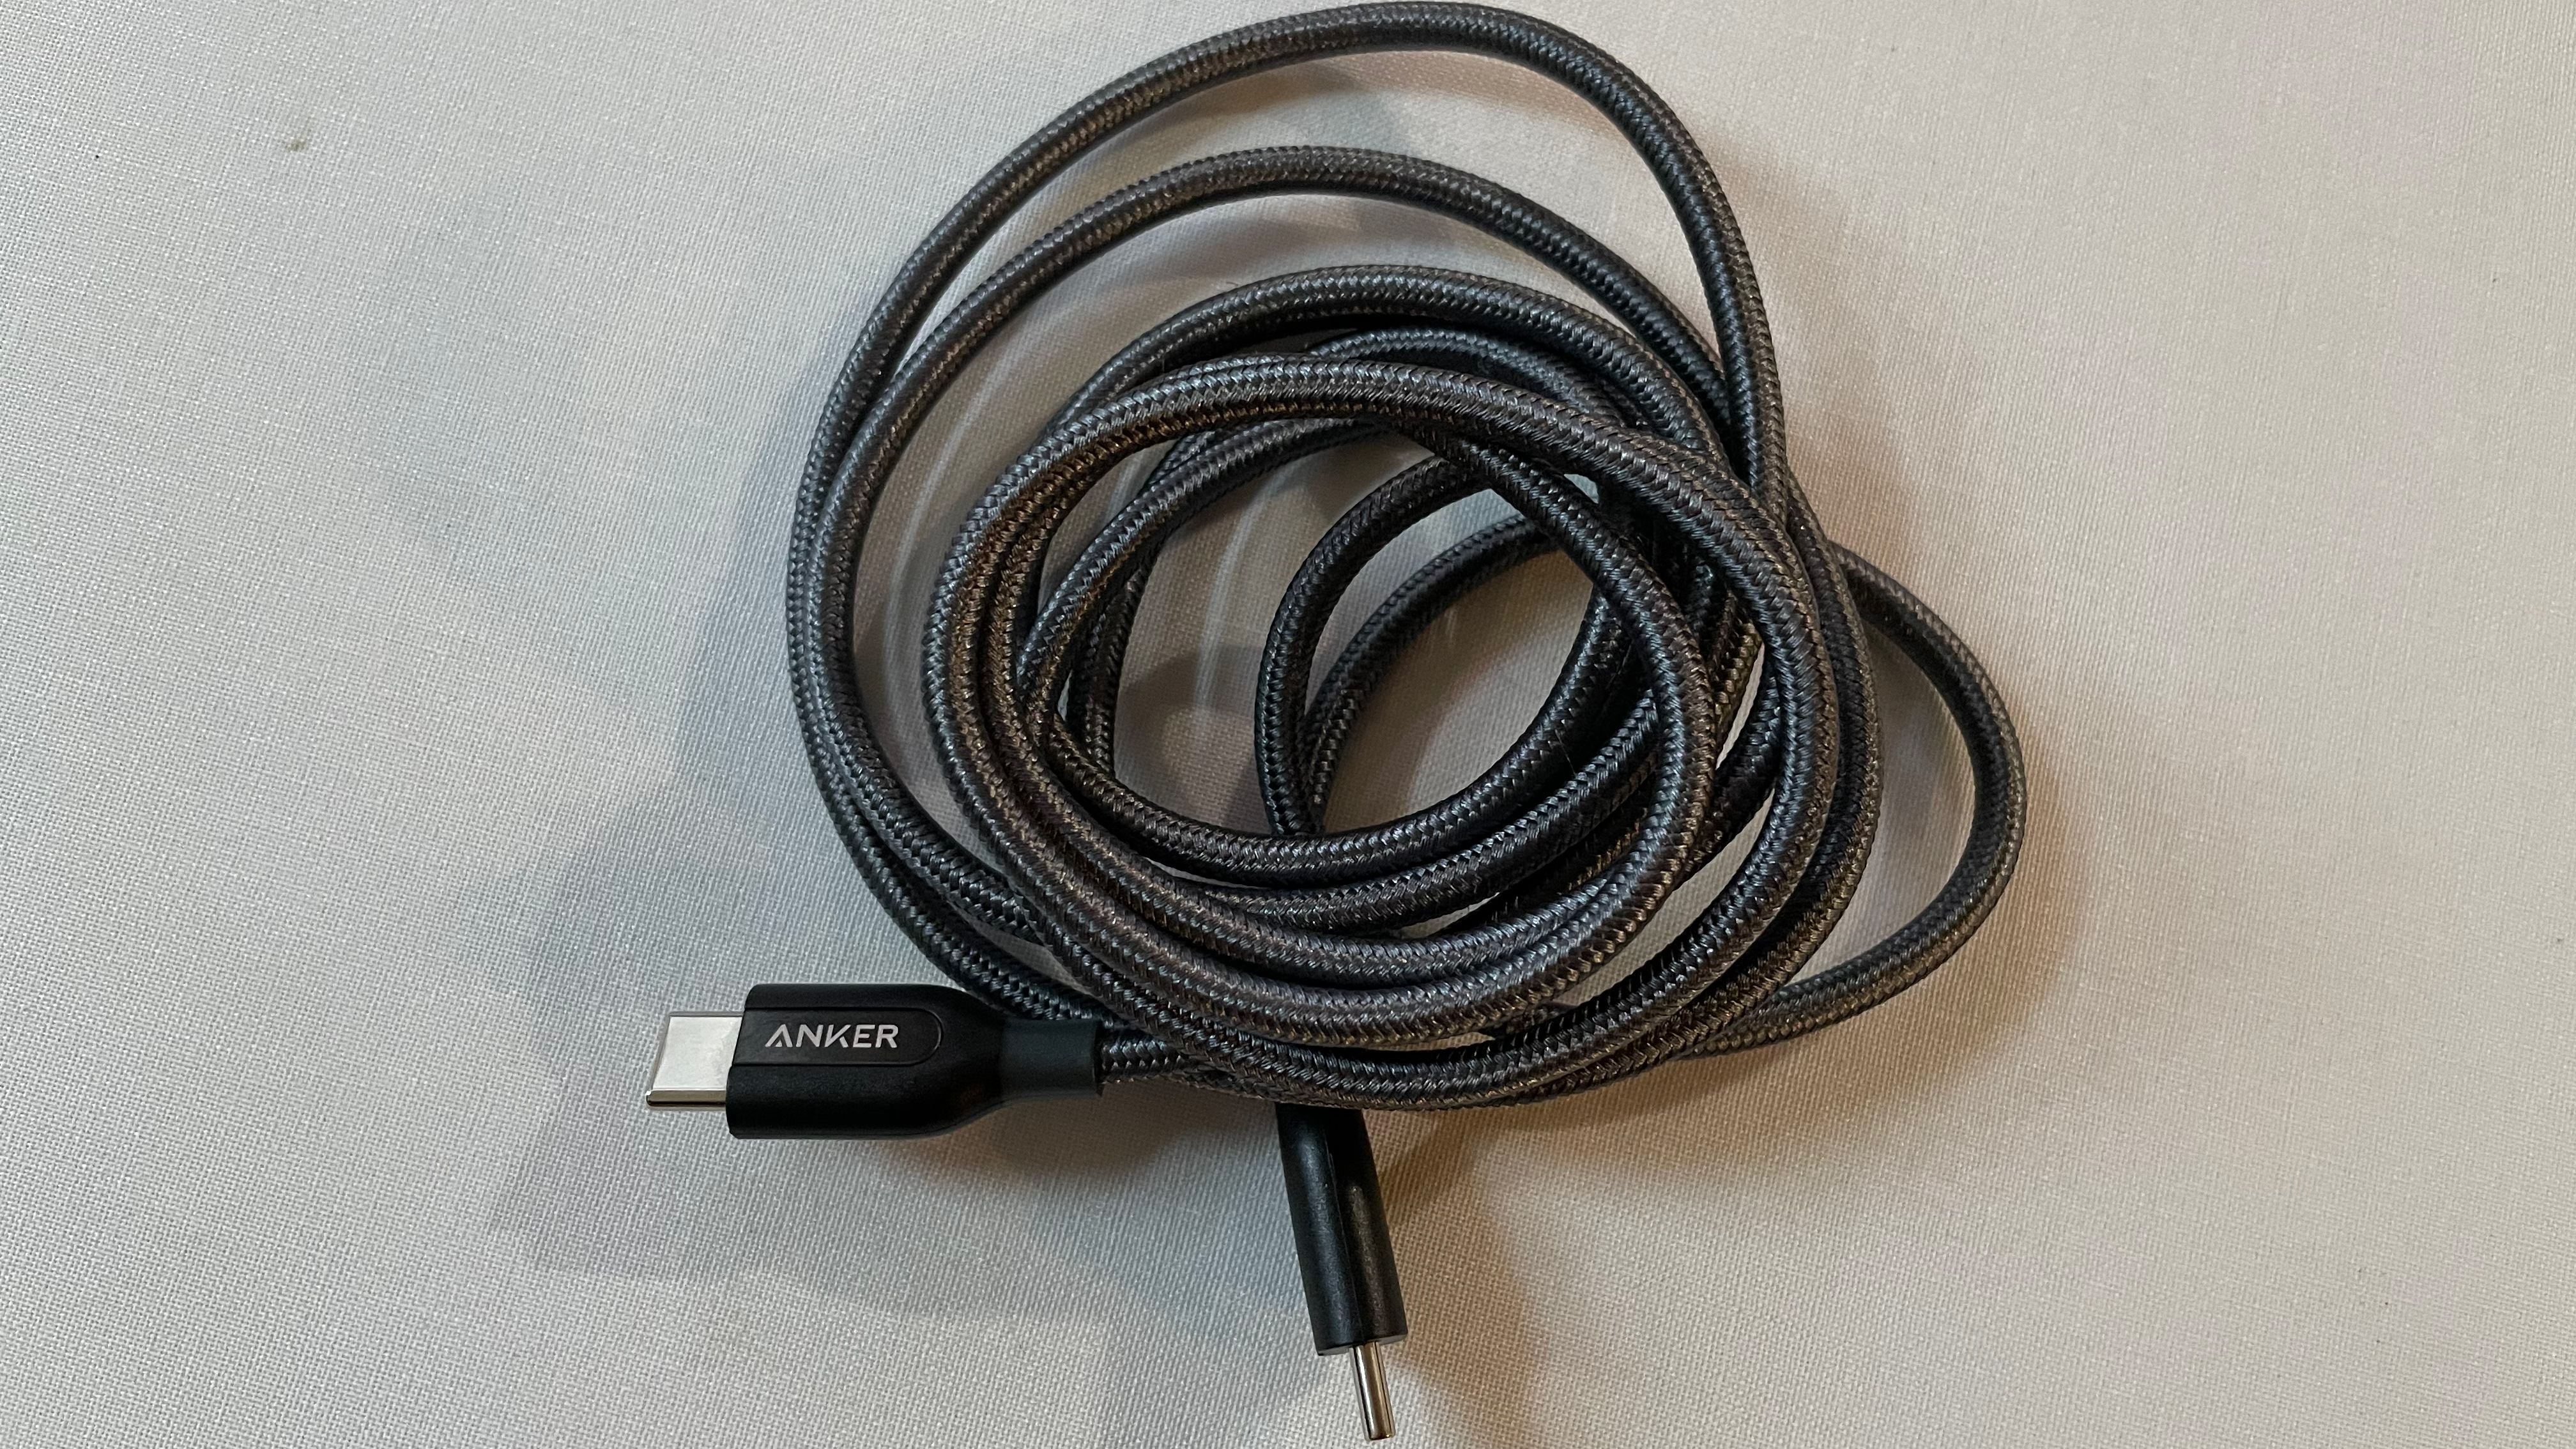 USB-C to USB-C cable